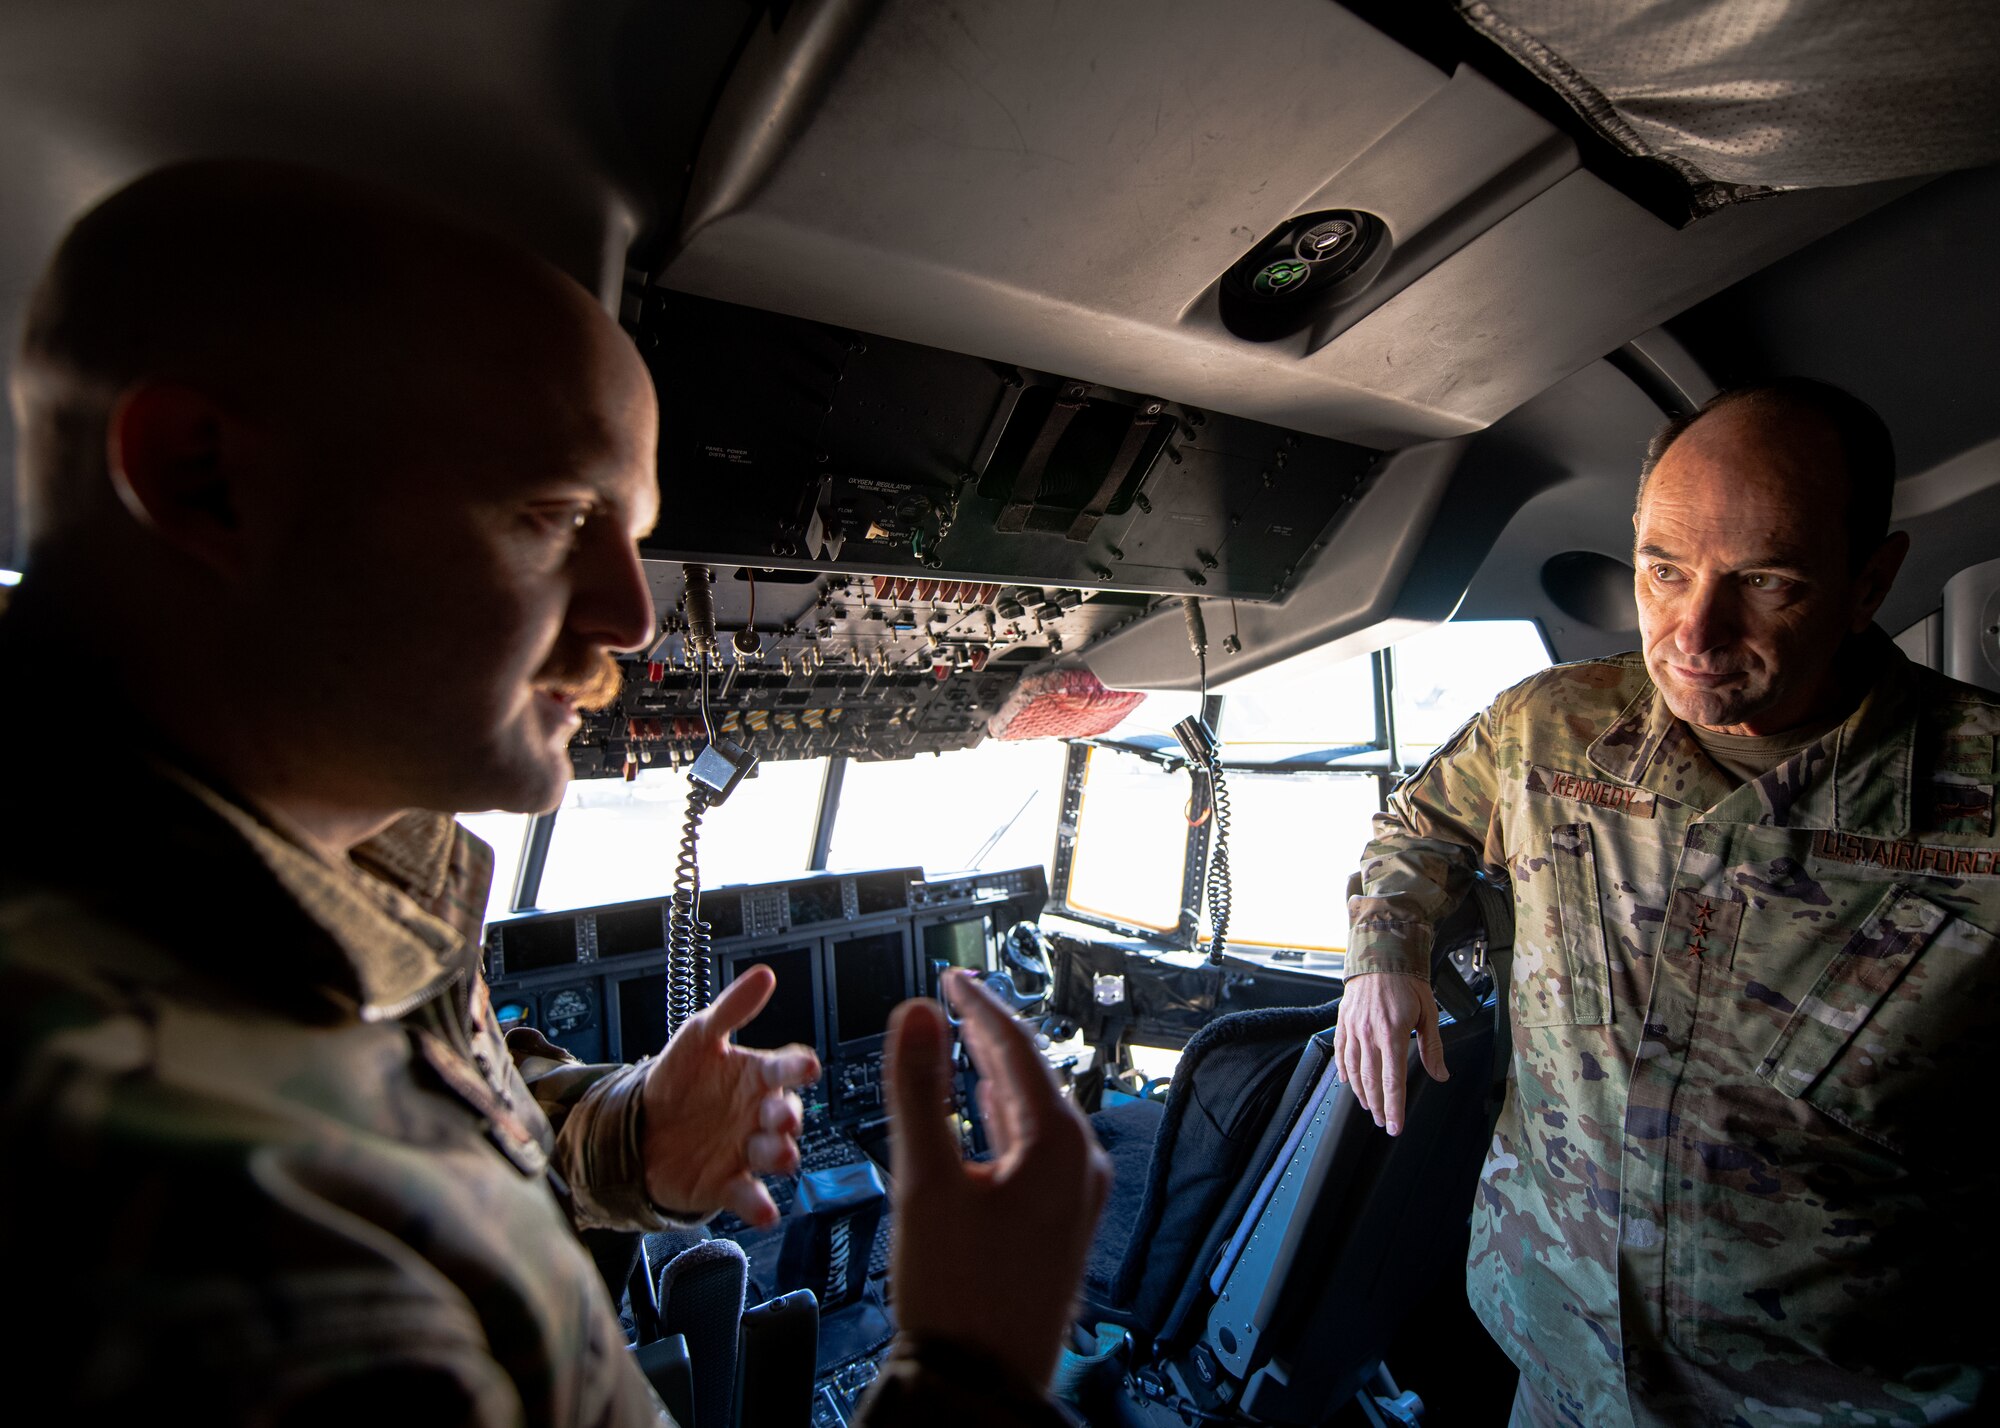 A man in military uniform speaks to another man in military uniform while inside a military aircraft cockpit.